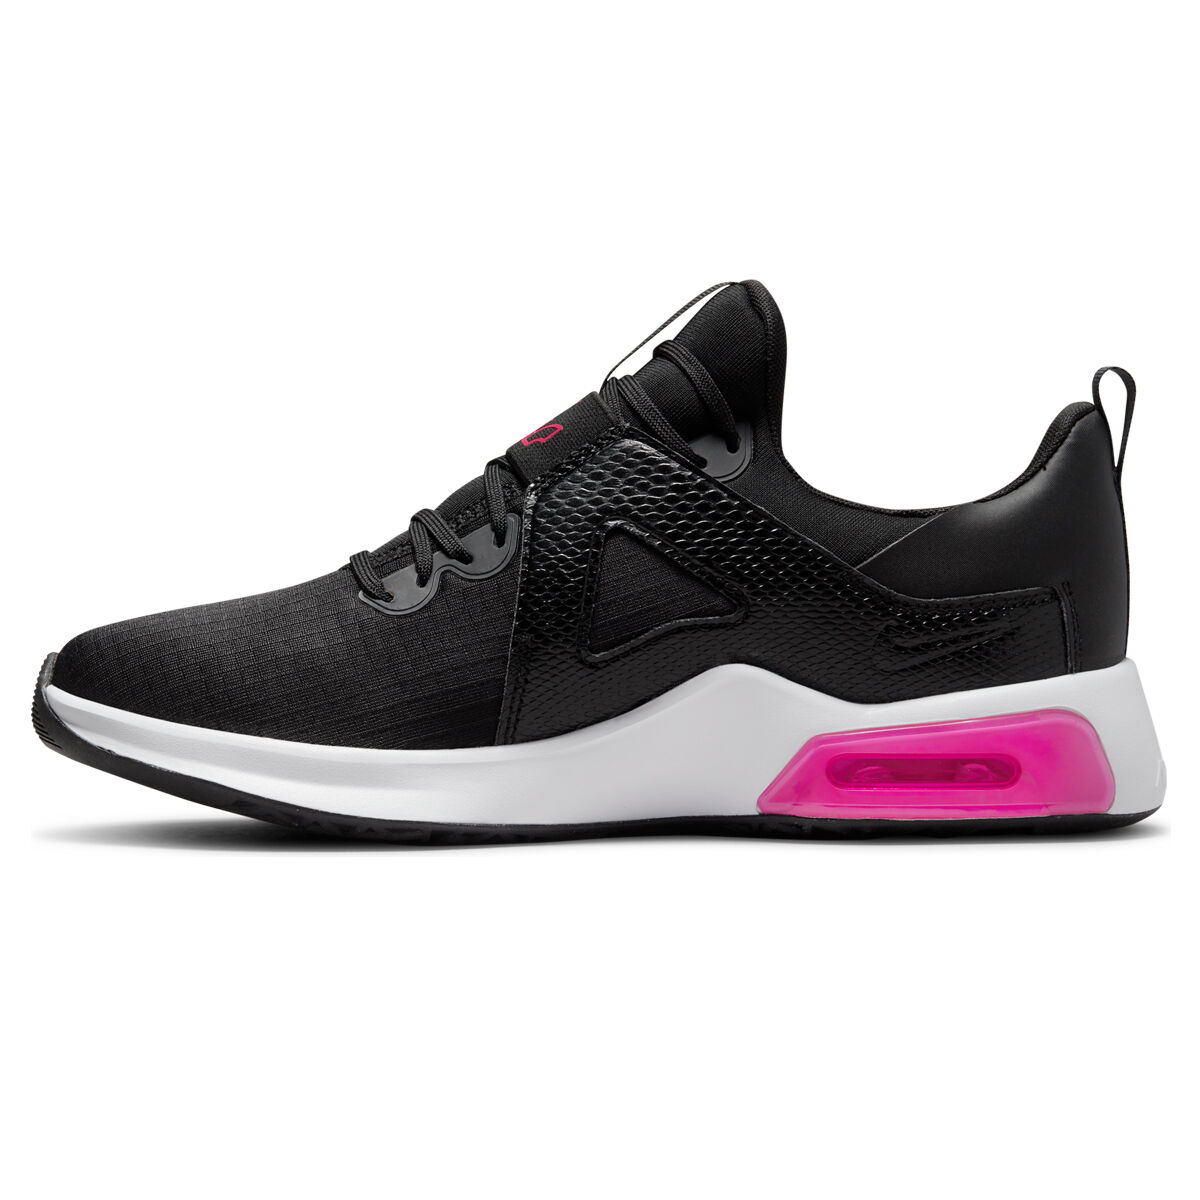 Women's Trainers Shoes | Nike, adidas & more | rebel